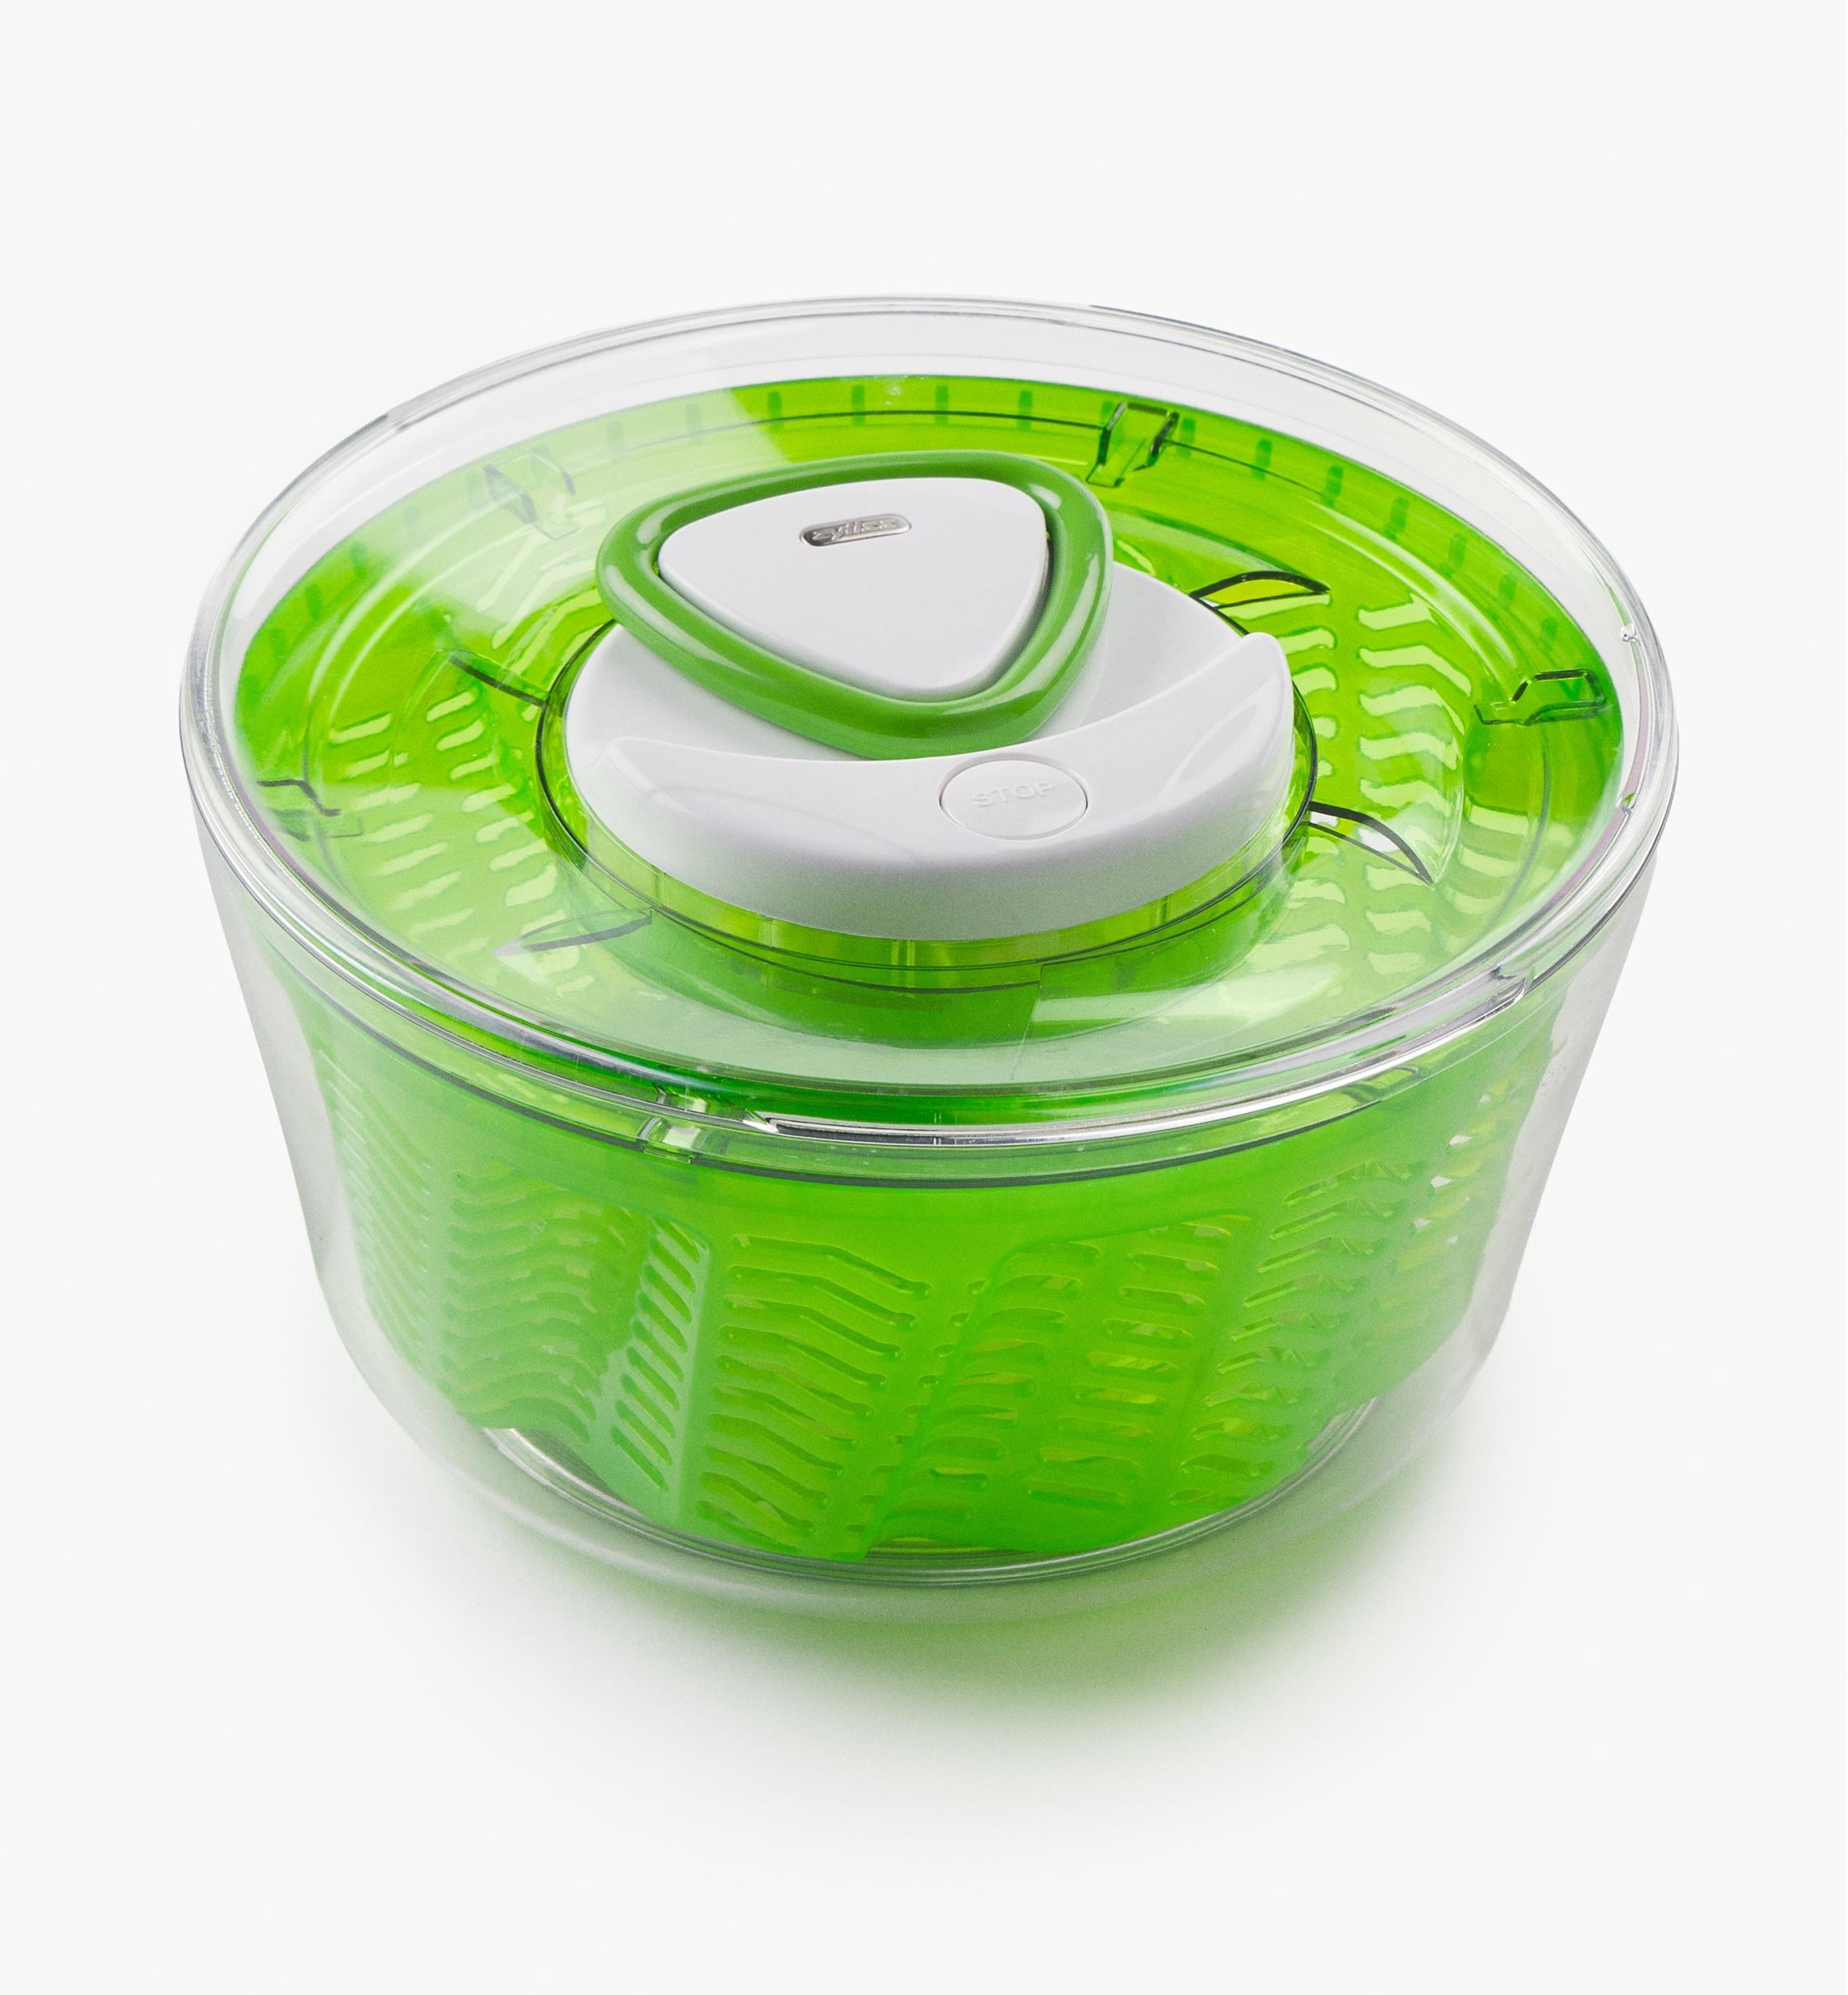 Dry Salad Spinner Large Green & White Zyliss Swift NEW IN BOX